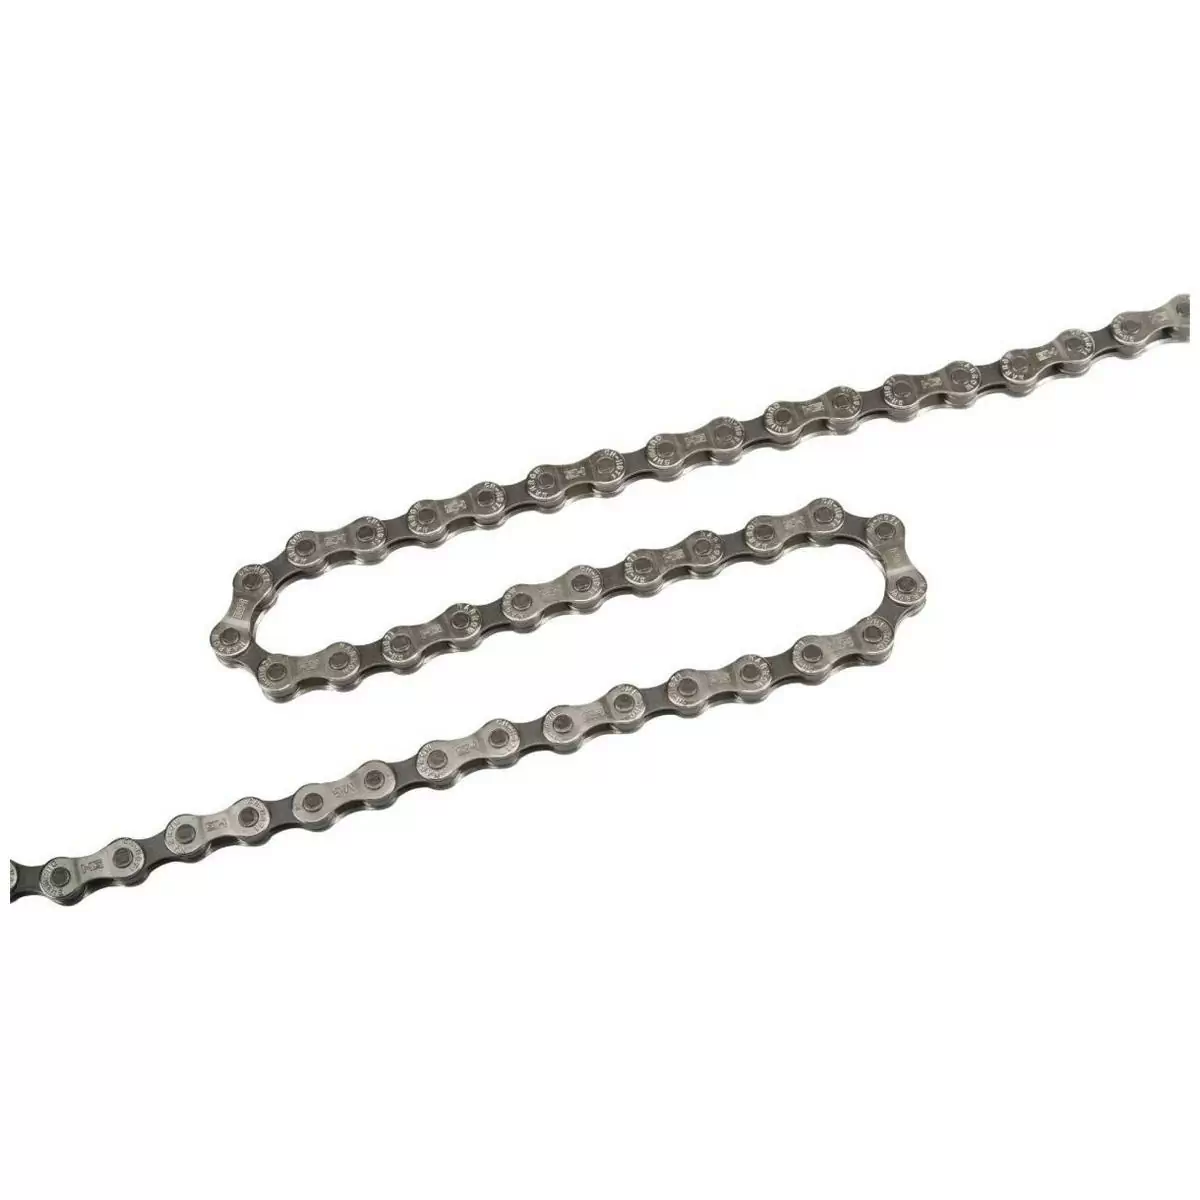 chain deore cn-hg71 7-8 speed 138 links - image